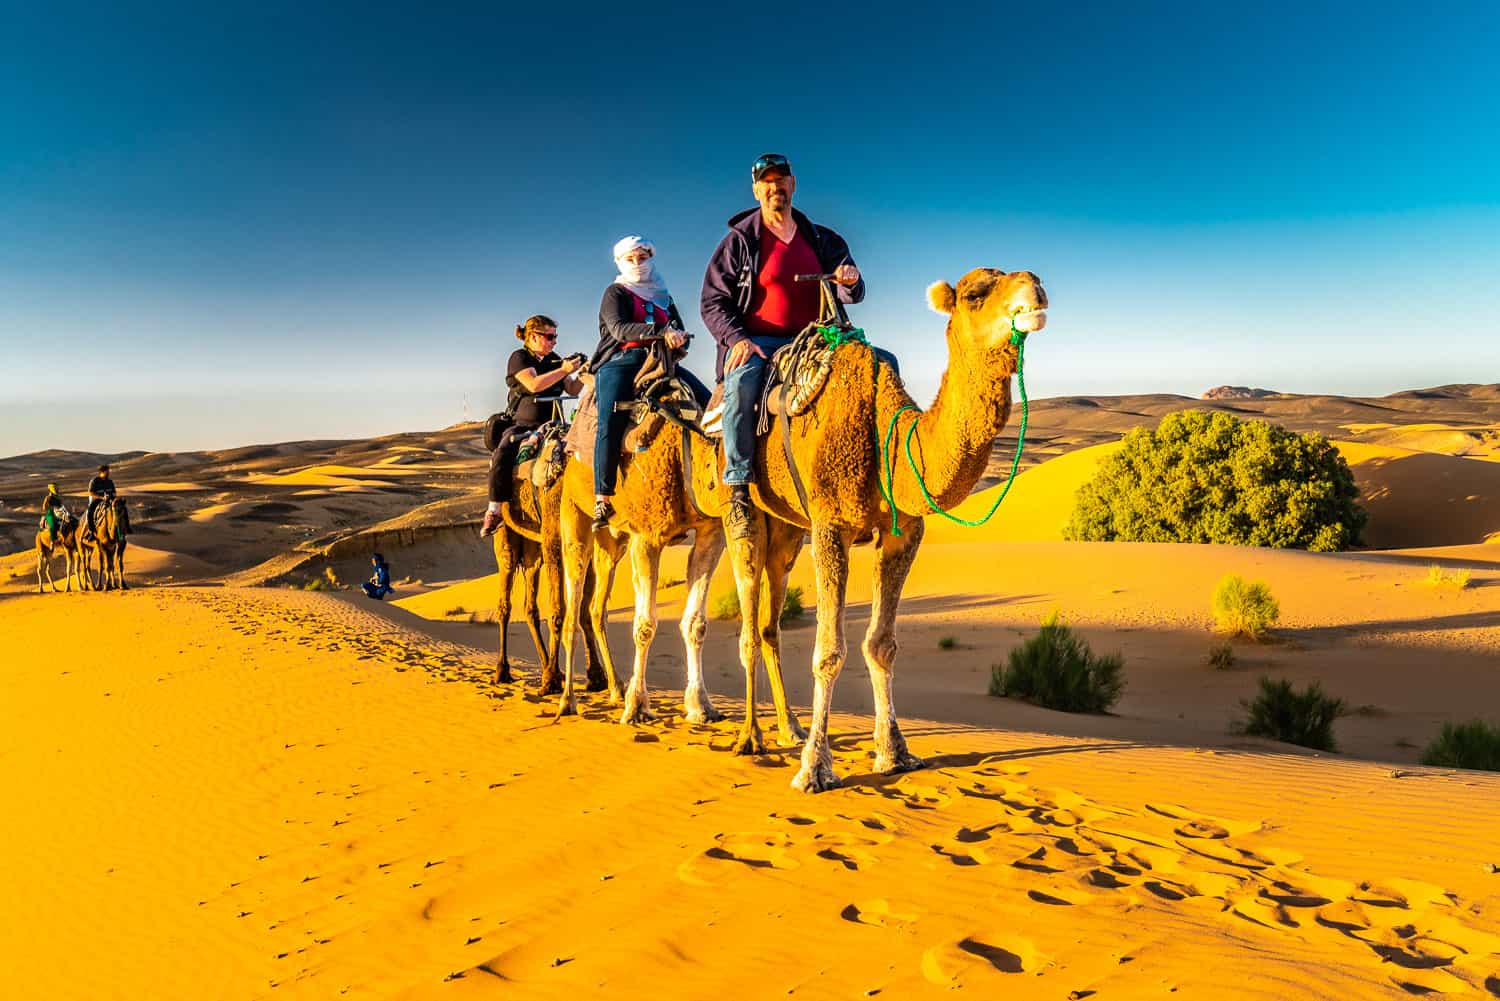 social media influencers Daniel and Linda Bibb on camels in Morocco, one of their As We Saw It travel destinations.